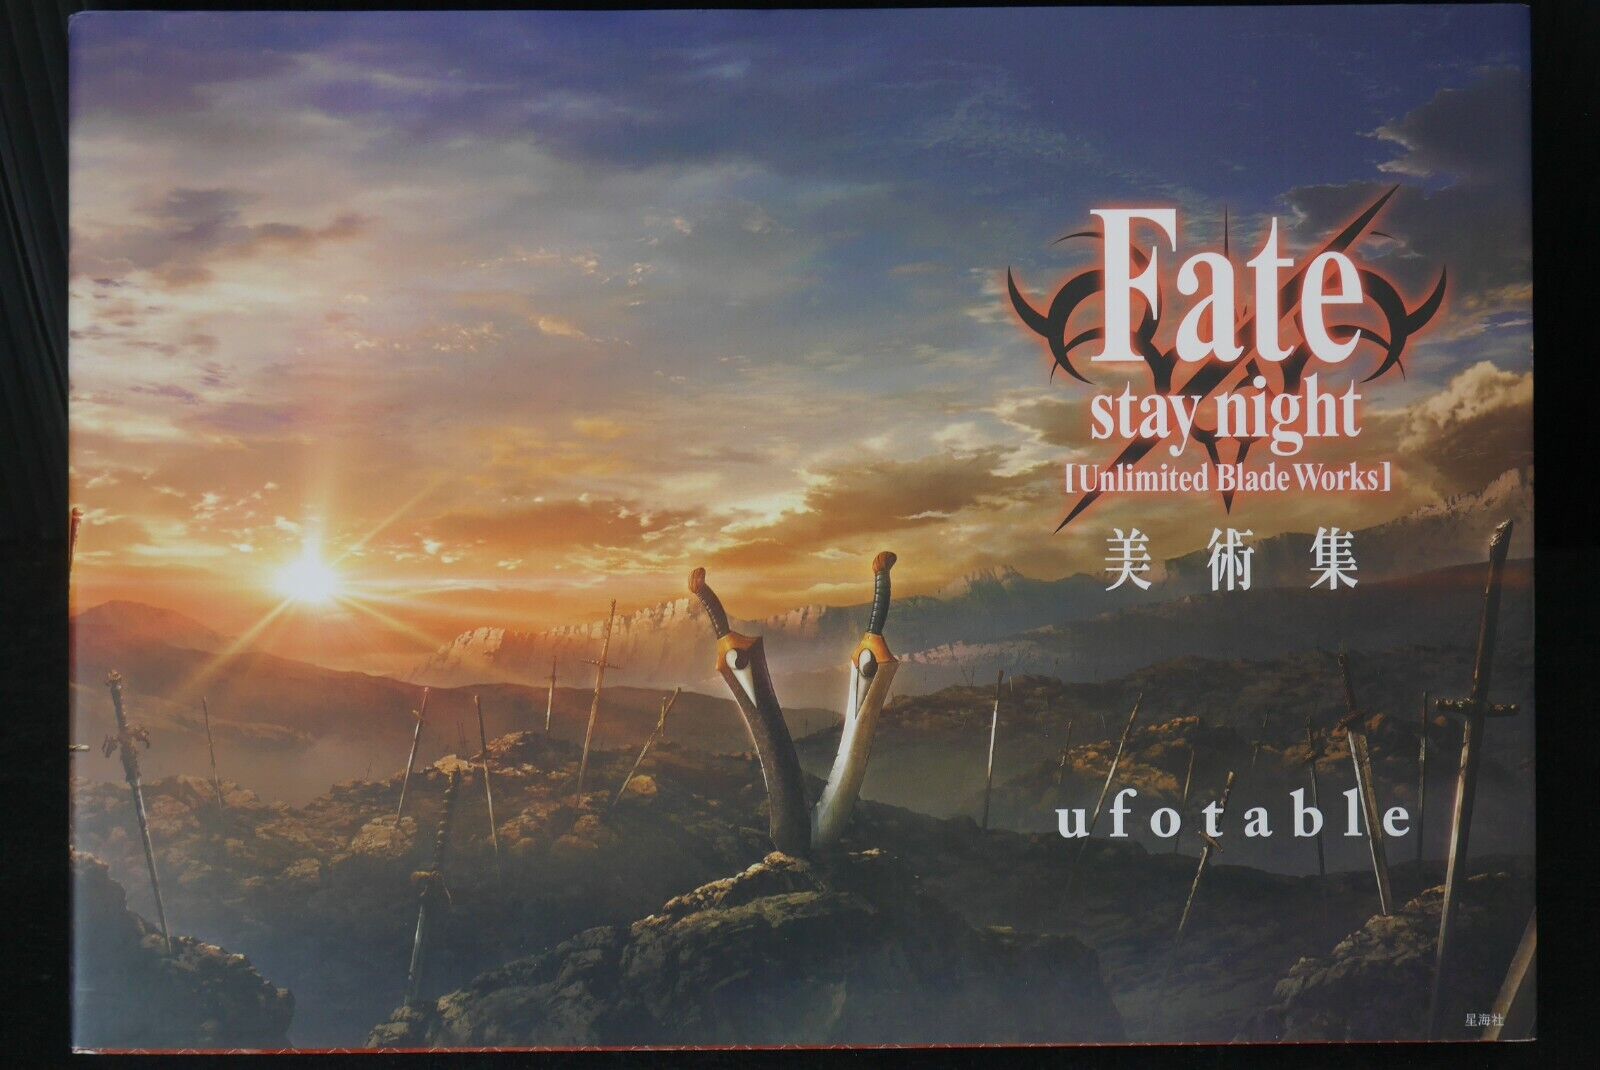 ufotable: Fate/stay night \'Unlimited Blade Works\' Background Art Book JAPAN